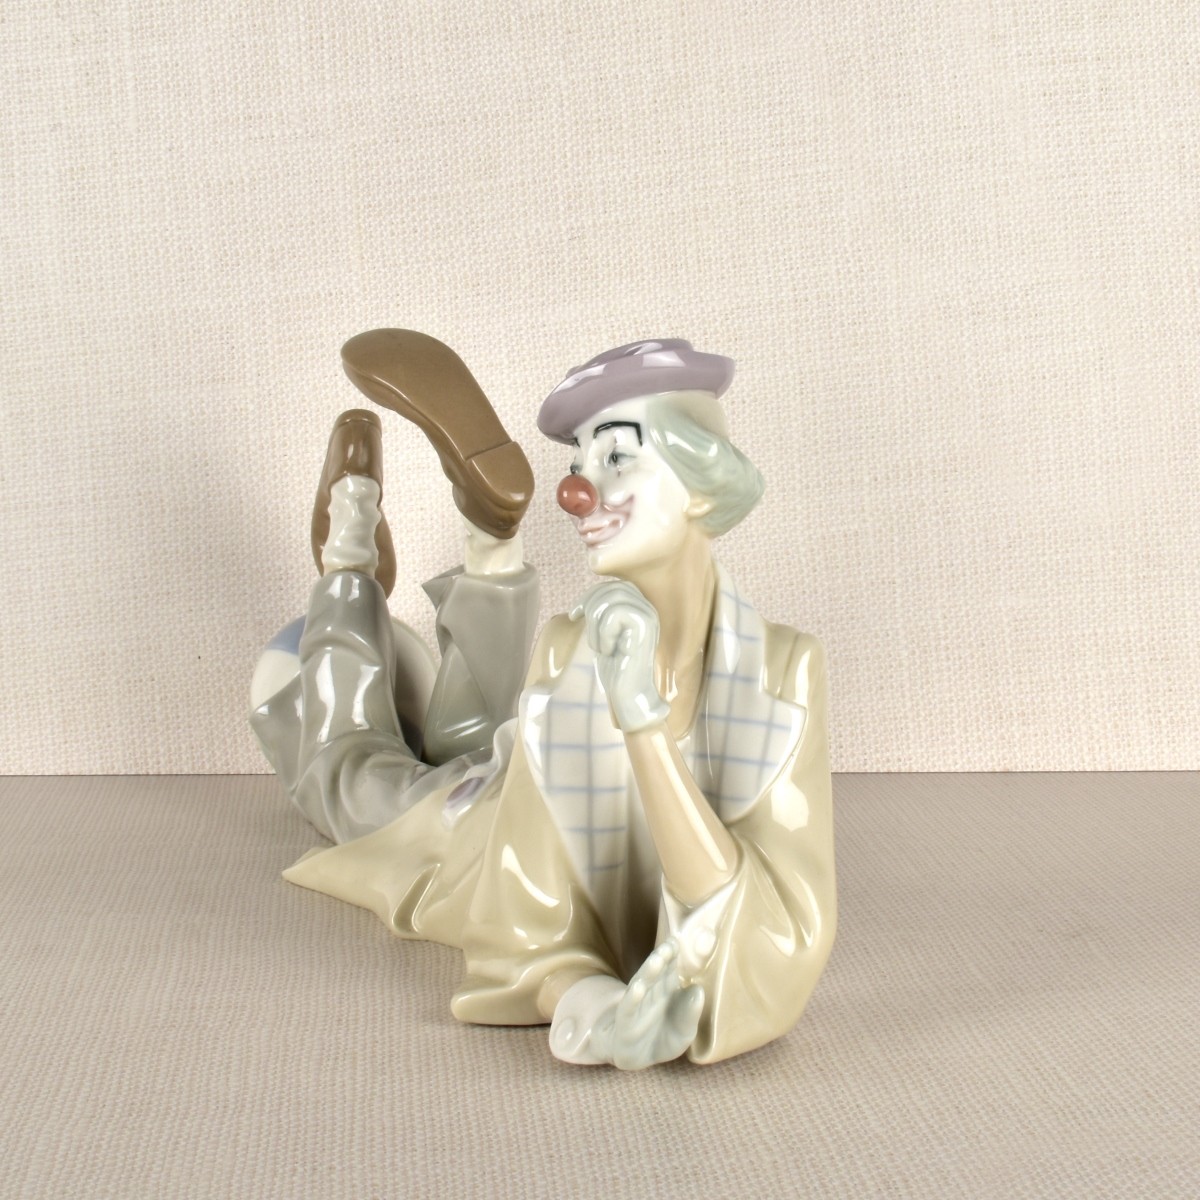 Lladro Figurine of a Clown with a Ball